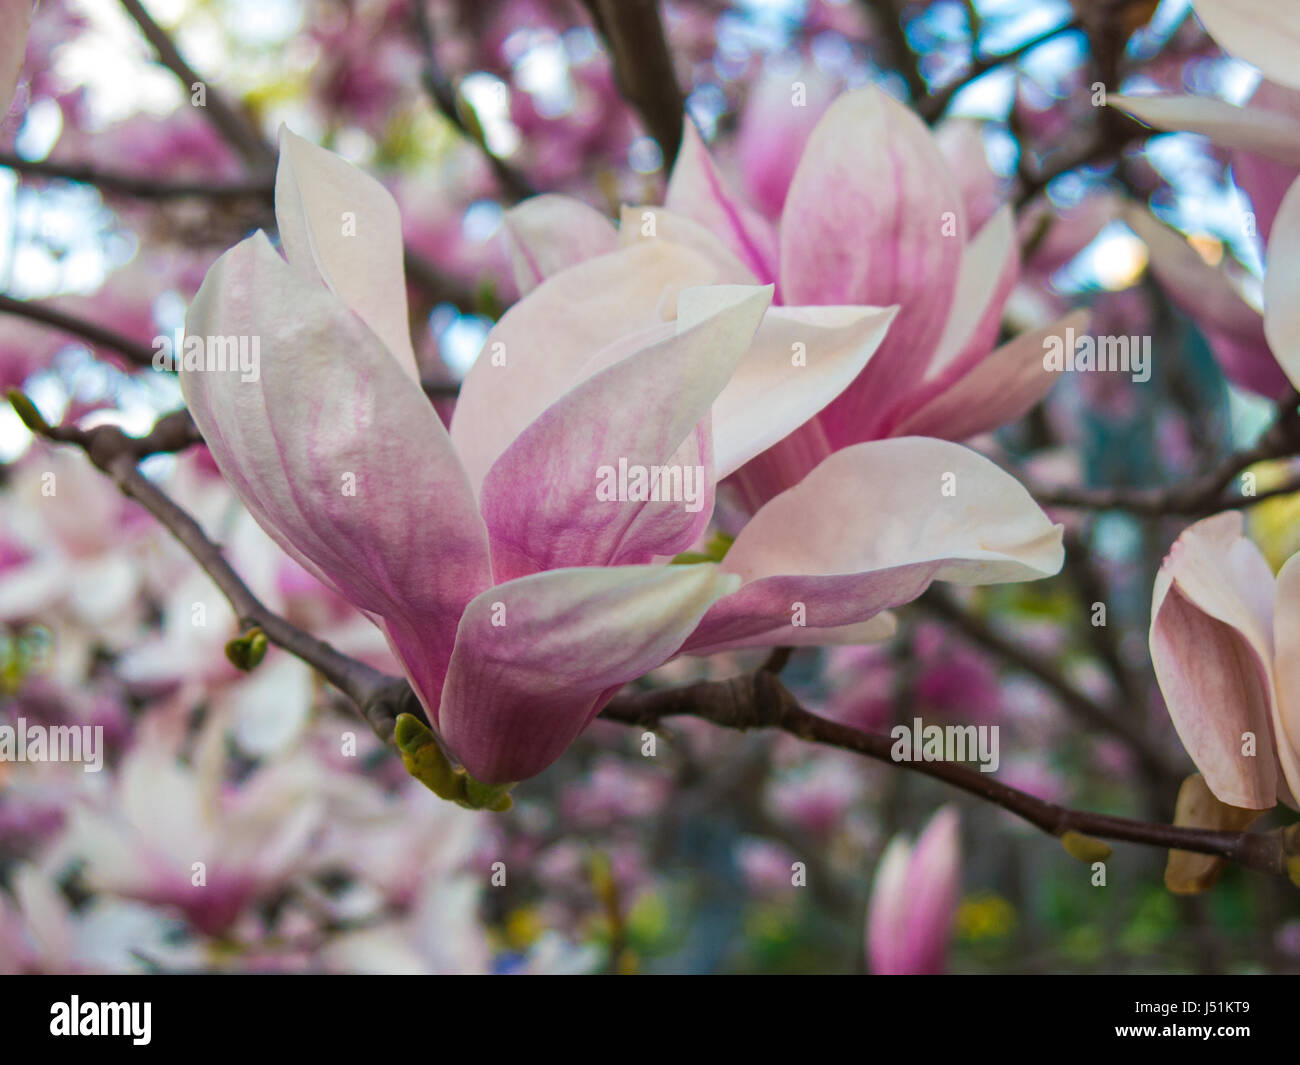 Pink White Magnolia x Soulangeana Blossom in Early Spring Garden Stock Photo